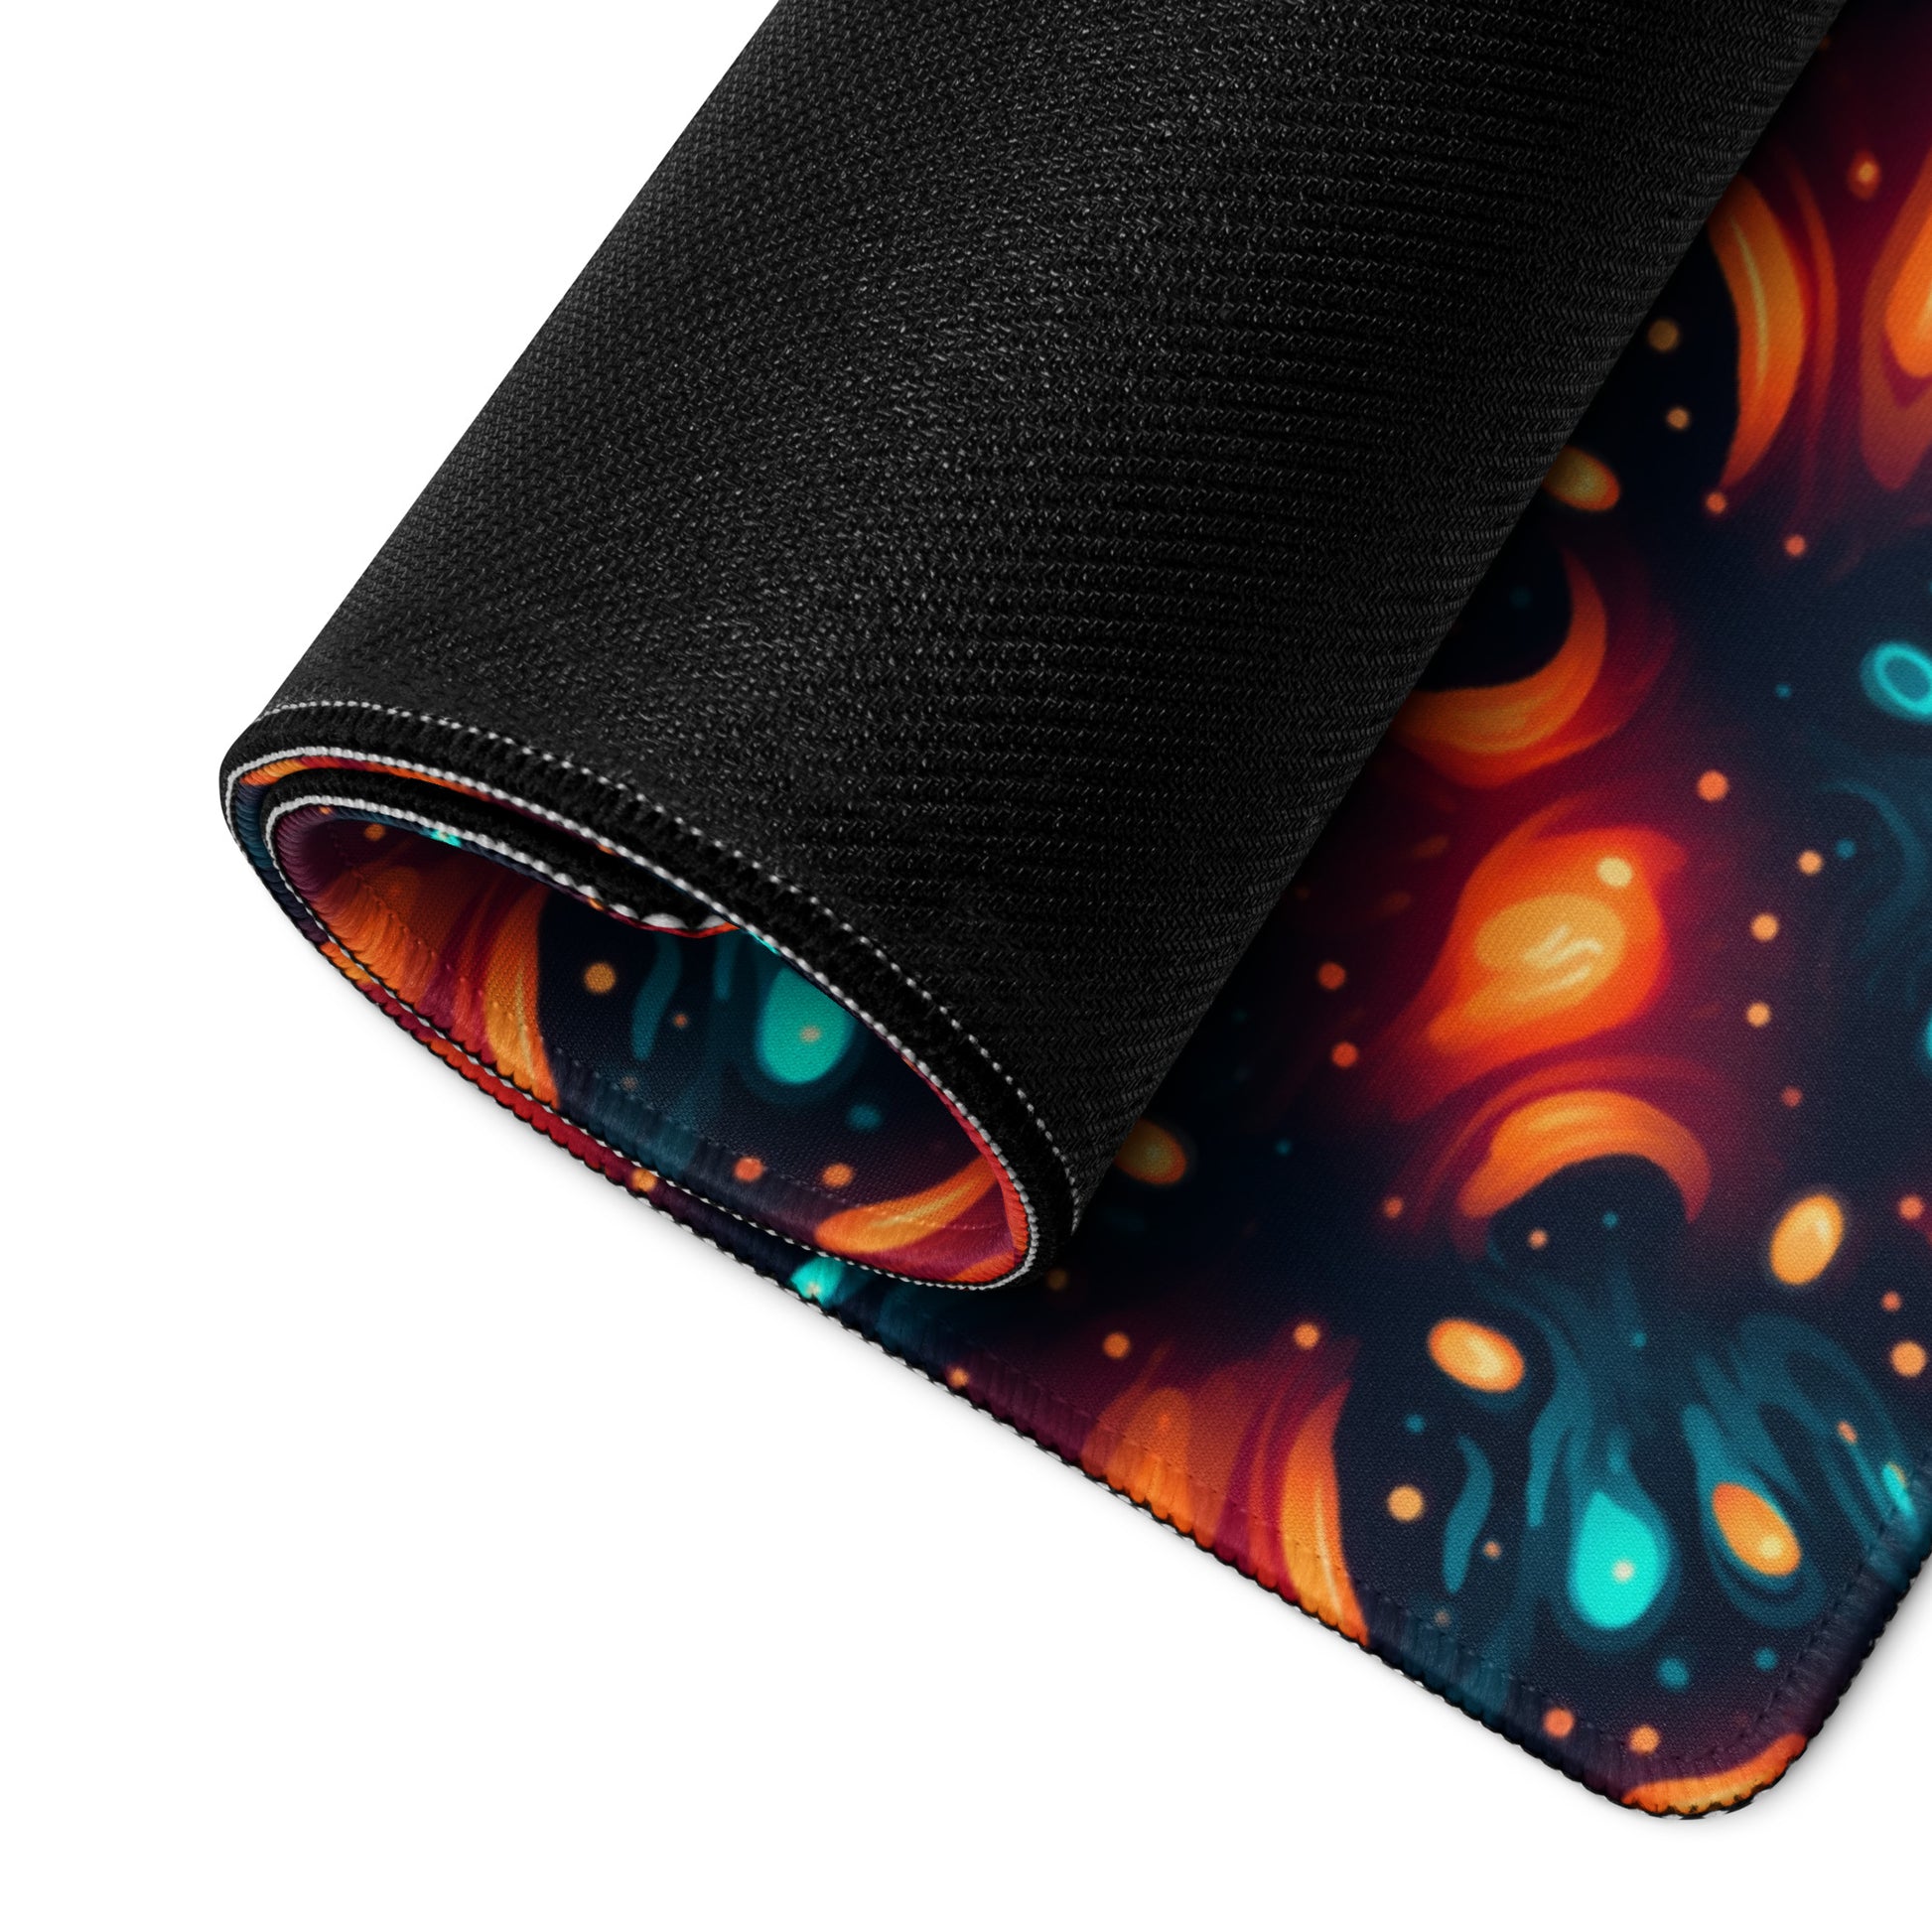 A 36" x 18" desk pad with a blue and orange abstract cross hatch pattern rolled up.